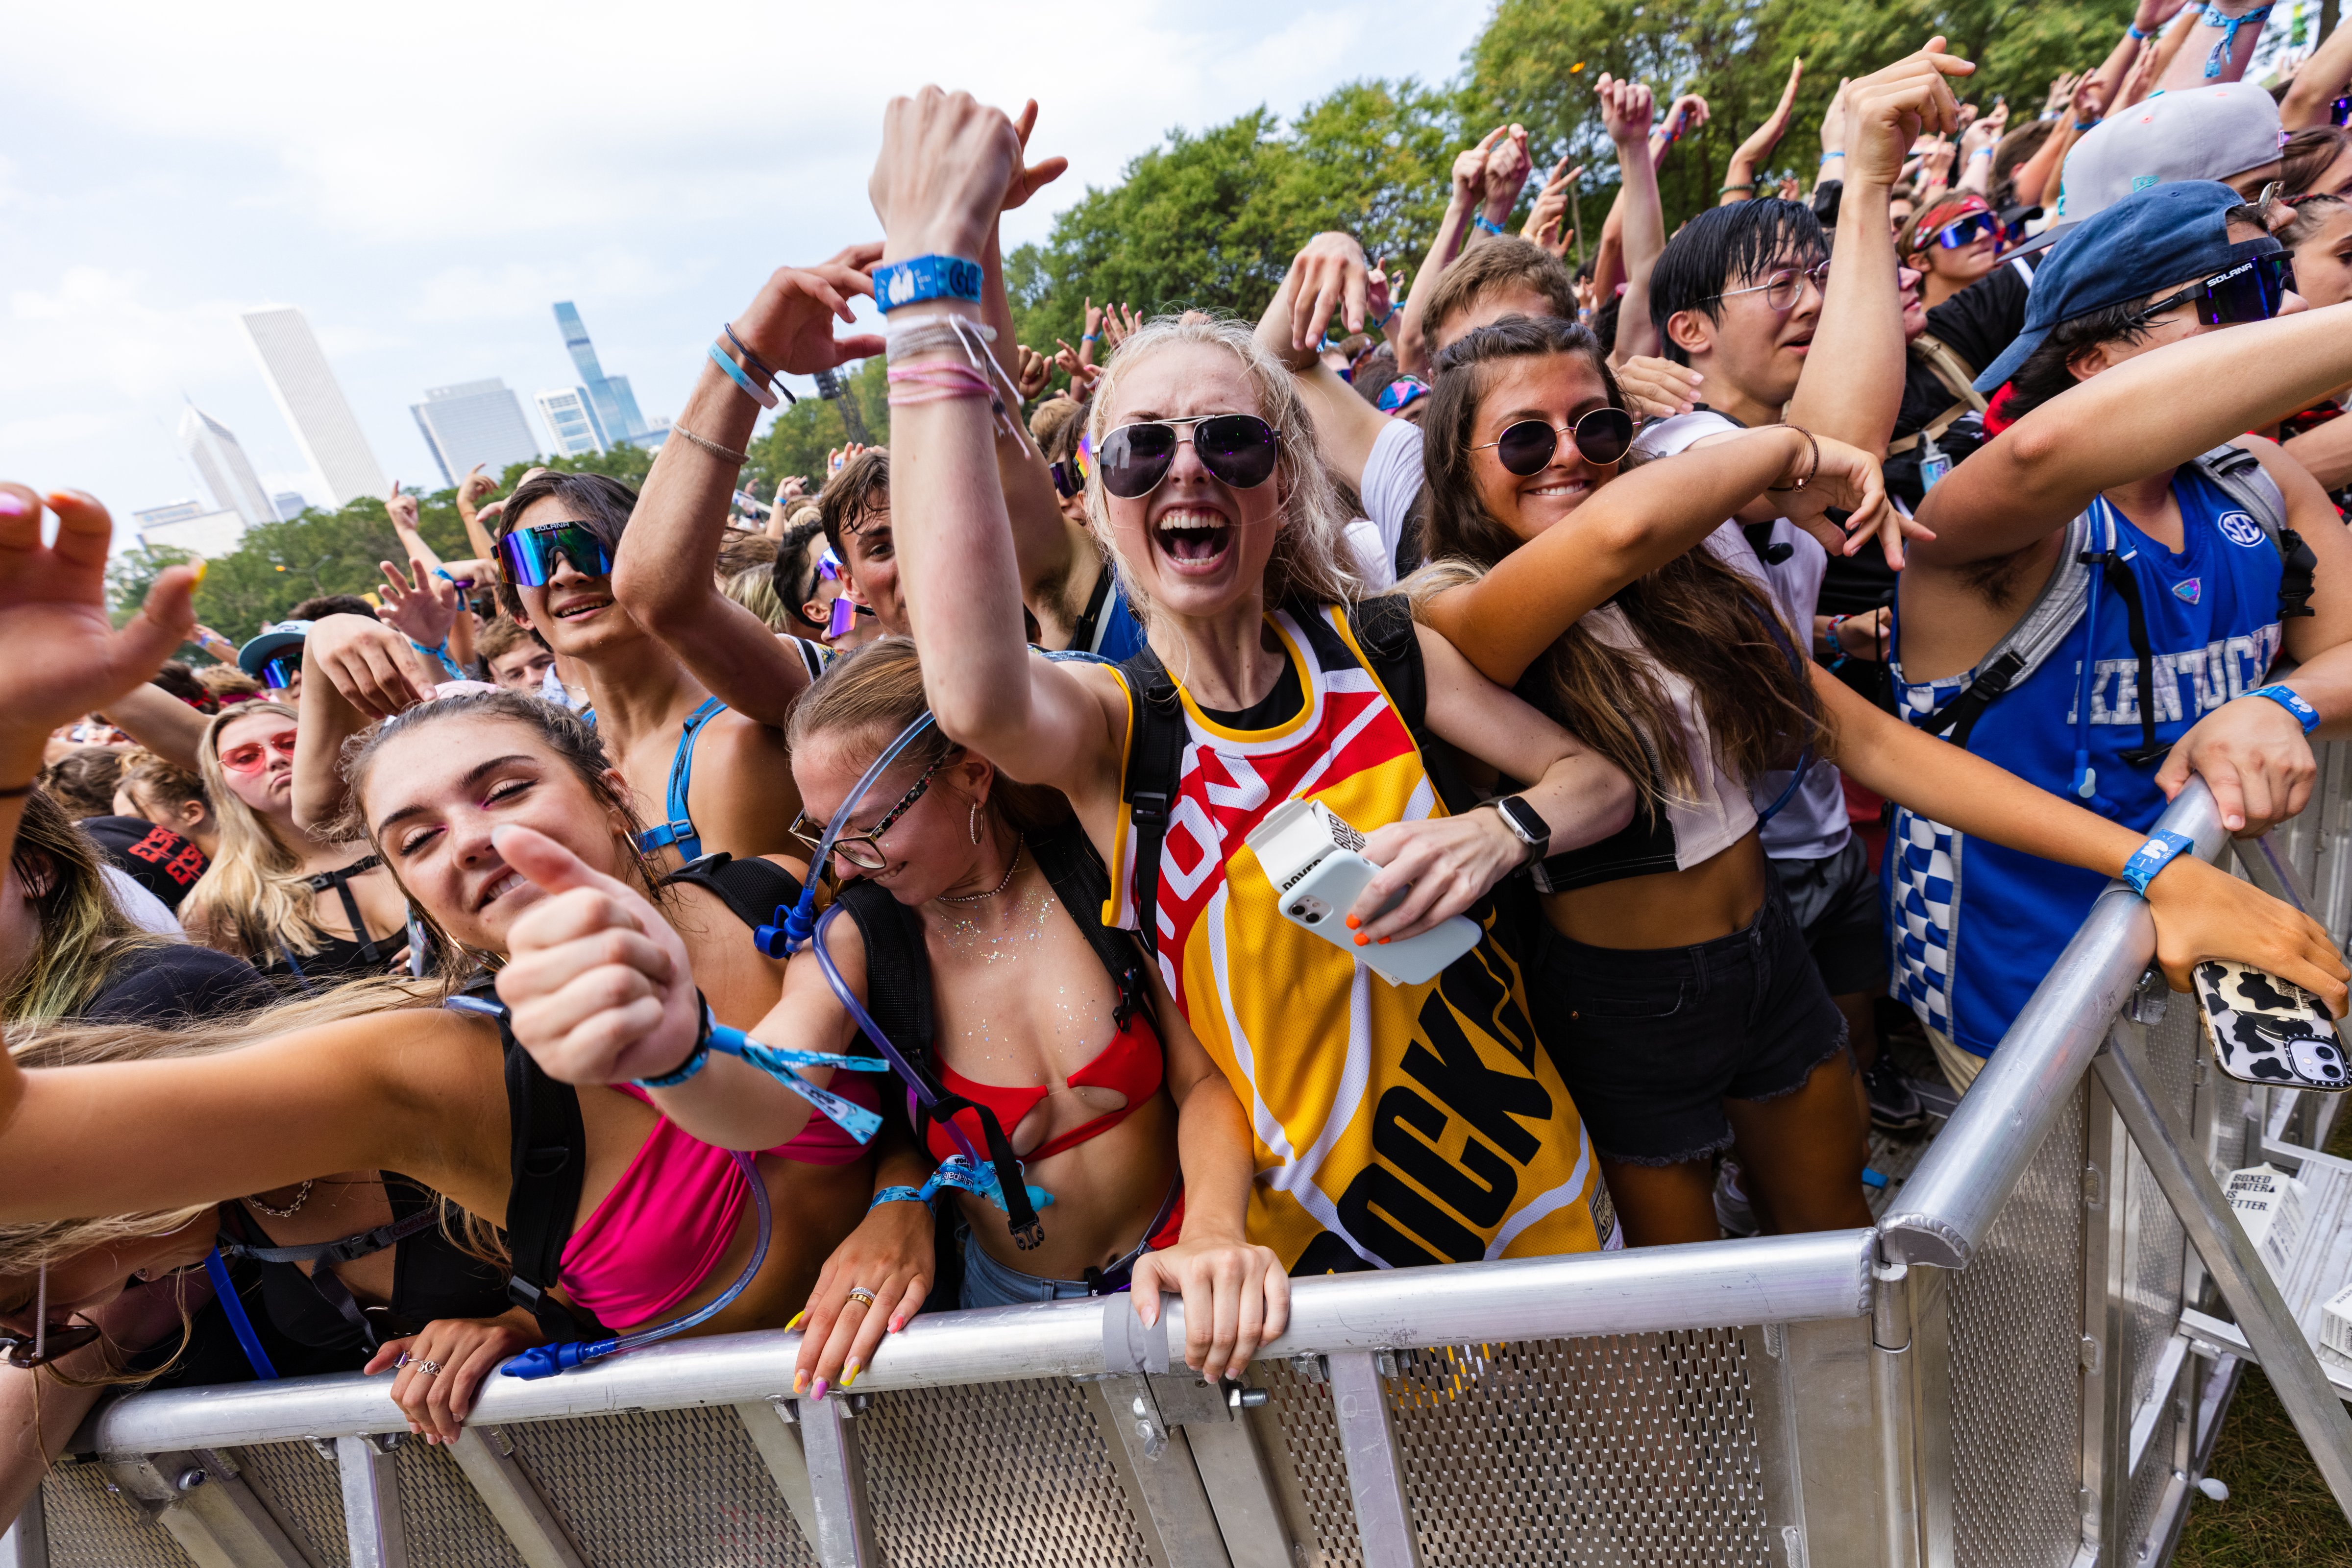 Fans at the first day of Lollapalooza 2021 in Chicago. (Michael Hickey—Getty Images)